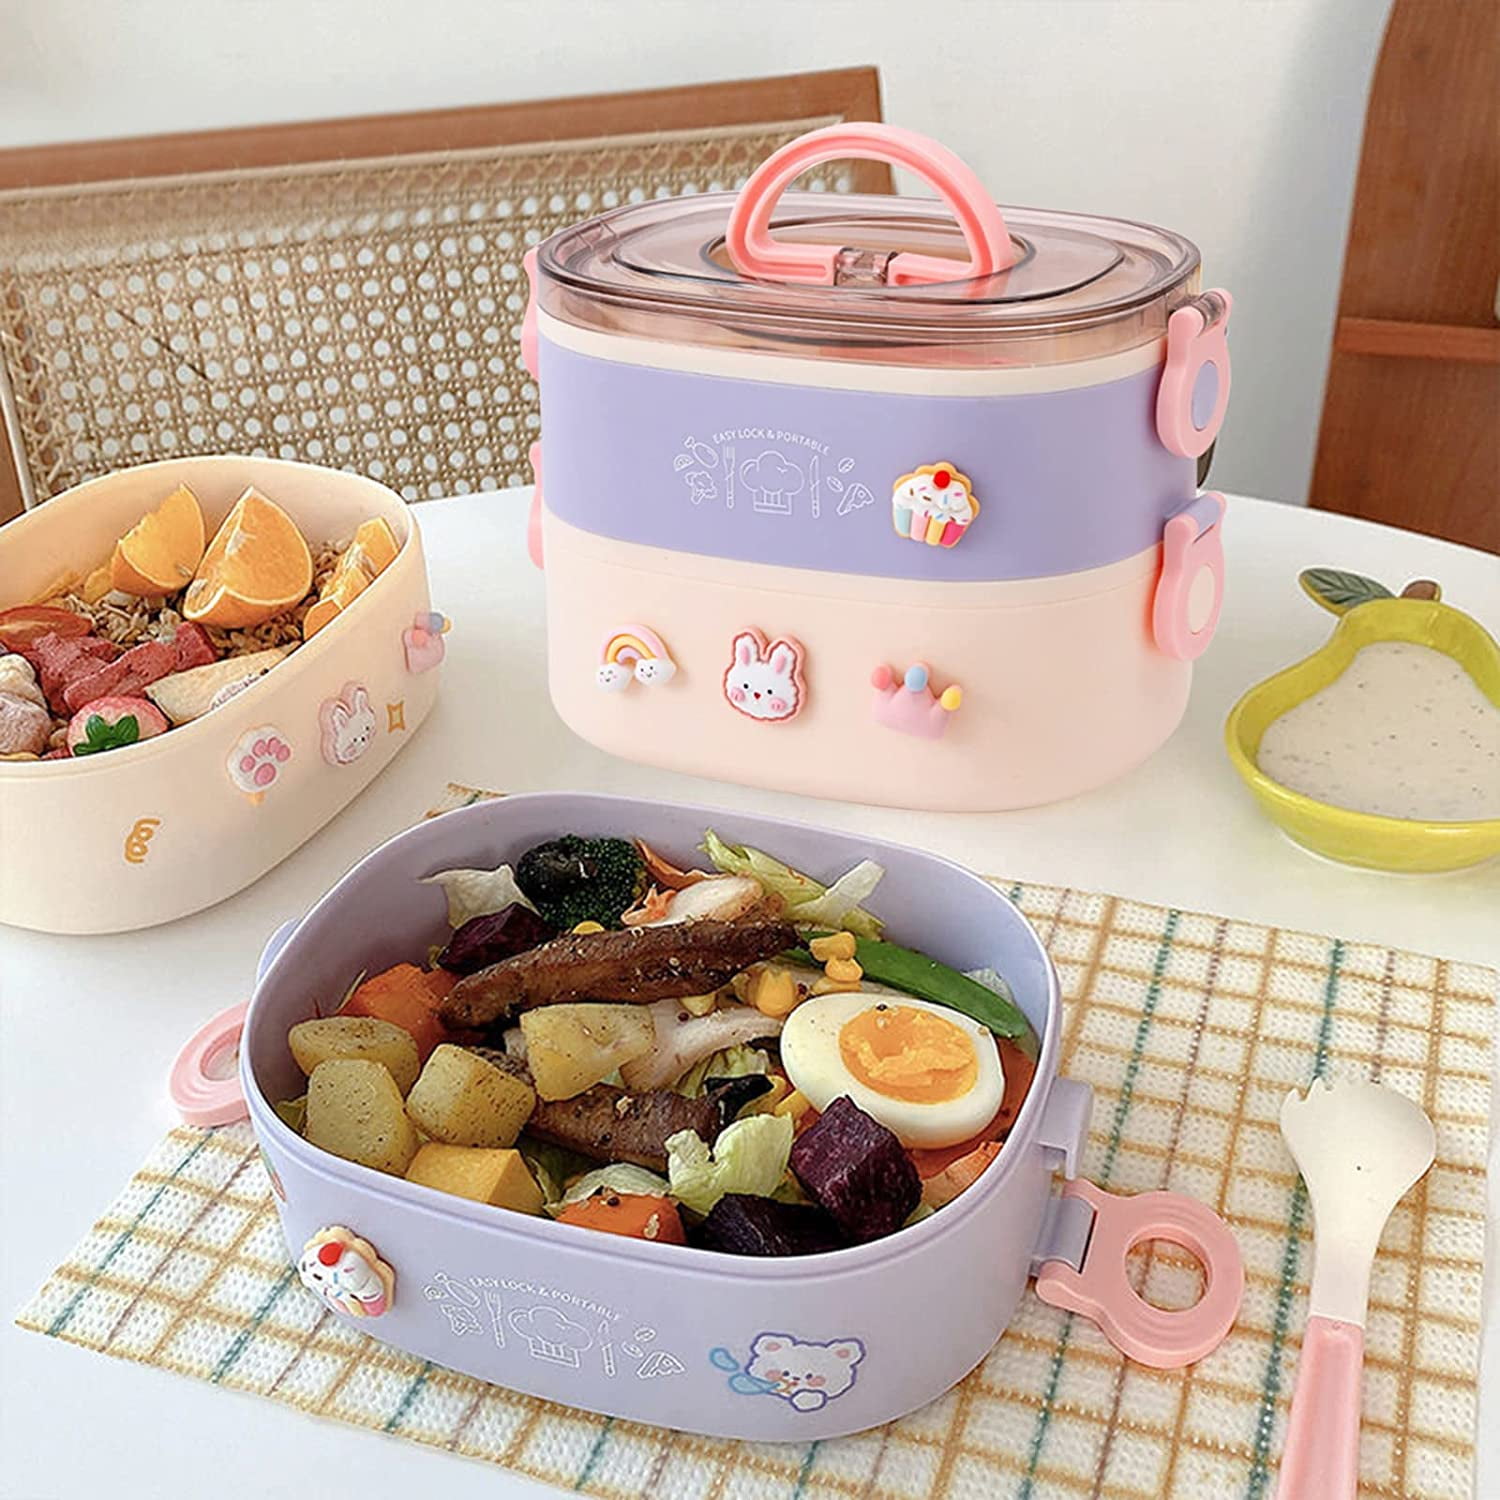 DaCool Adults Lunchbox Bento Box - 74 OZ All-in-One Stackable